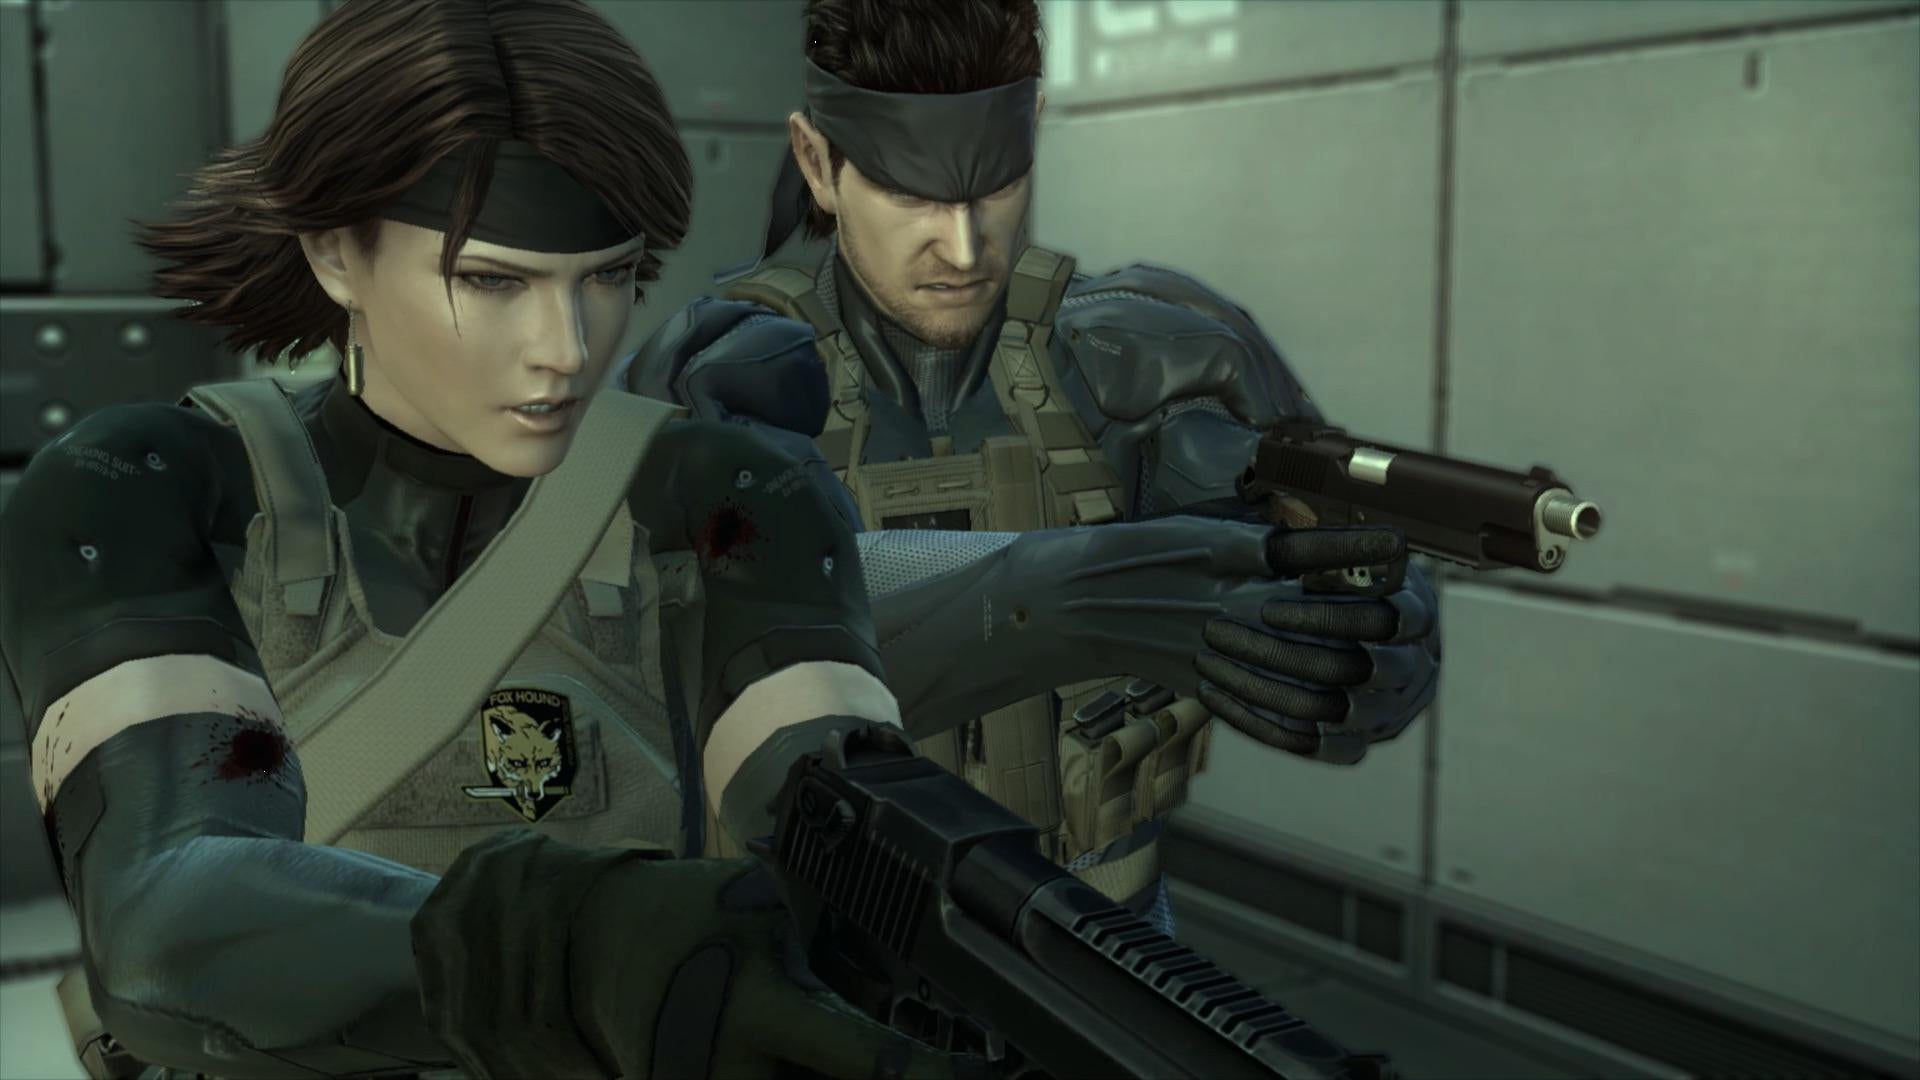 gaming couples who swing - Snake and Meryl